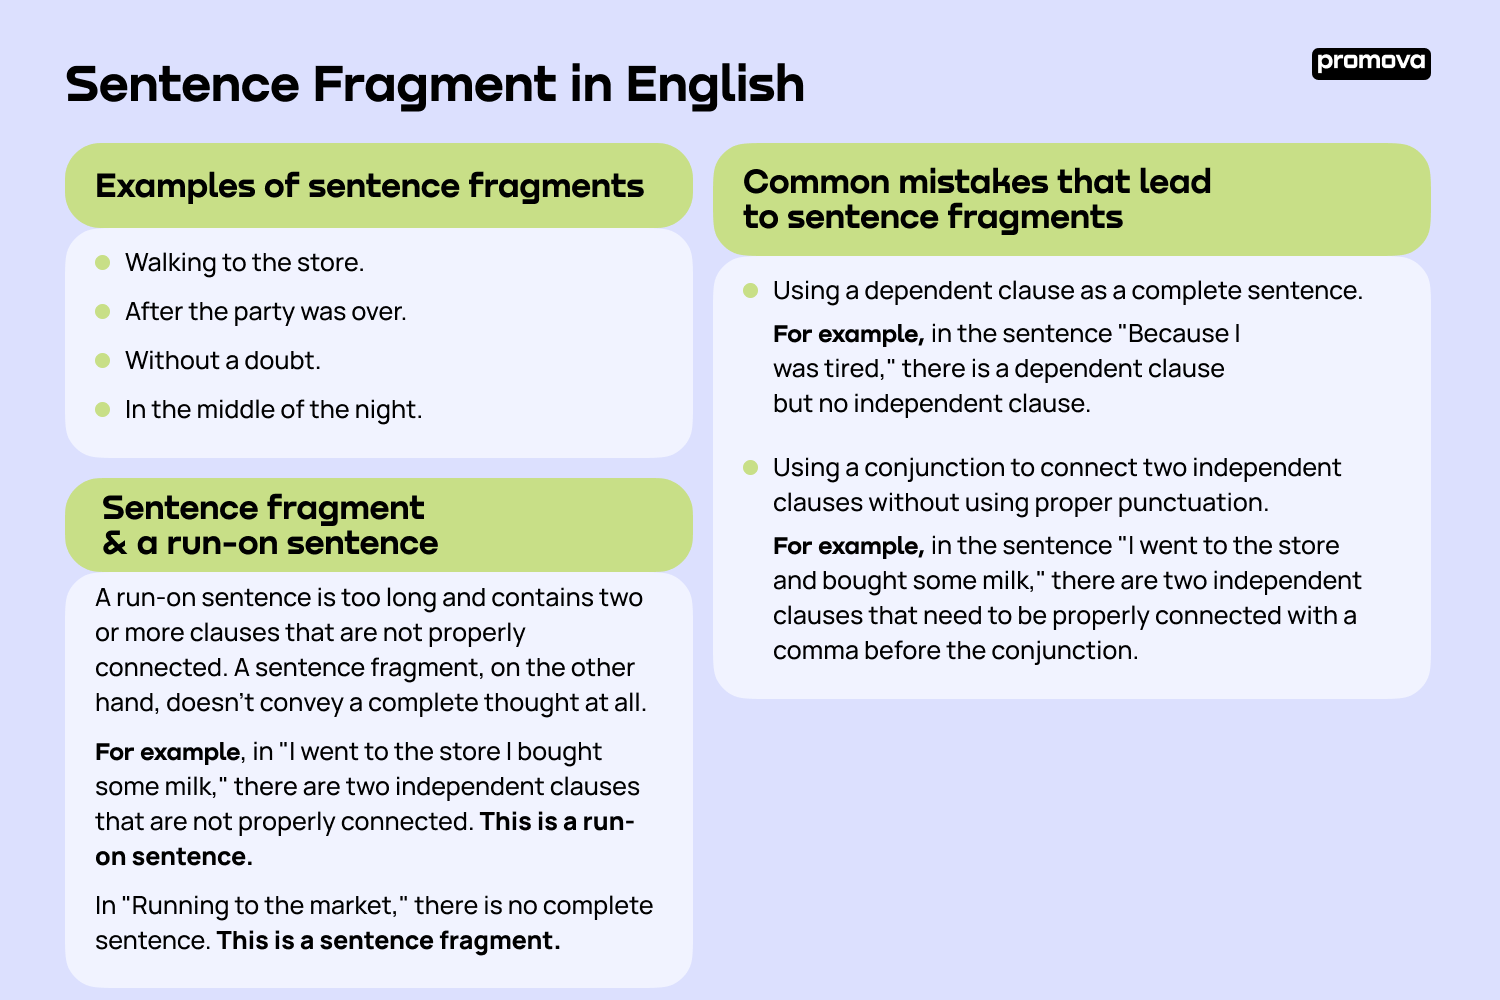 Examples of sentence fragments